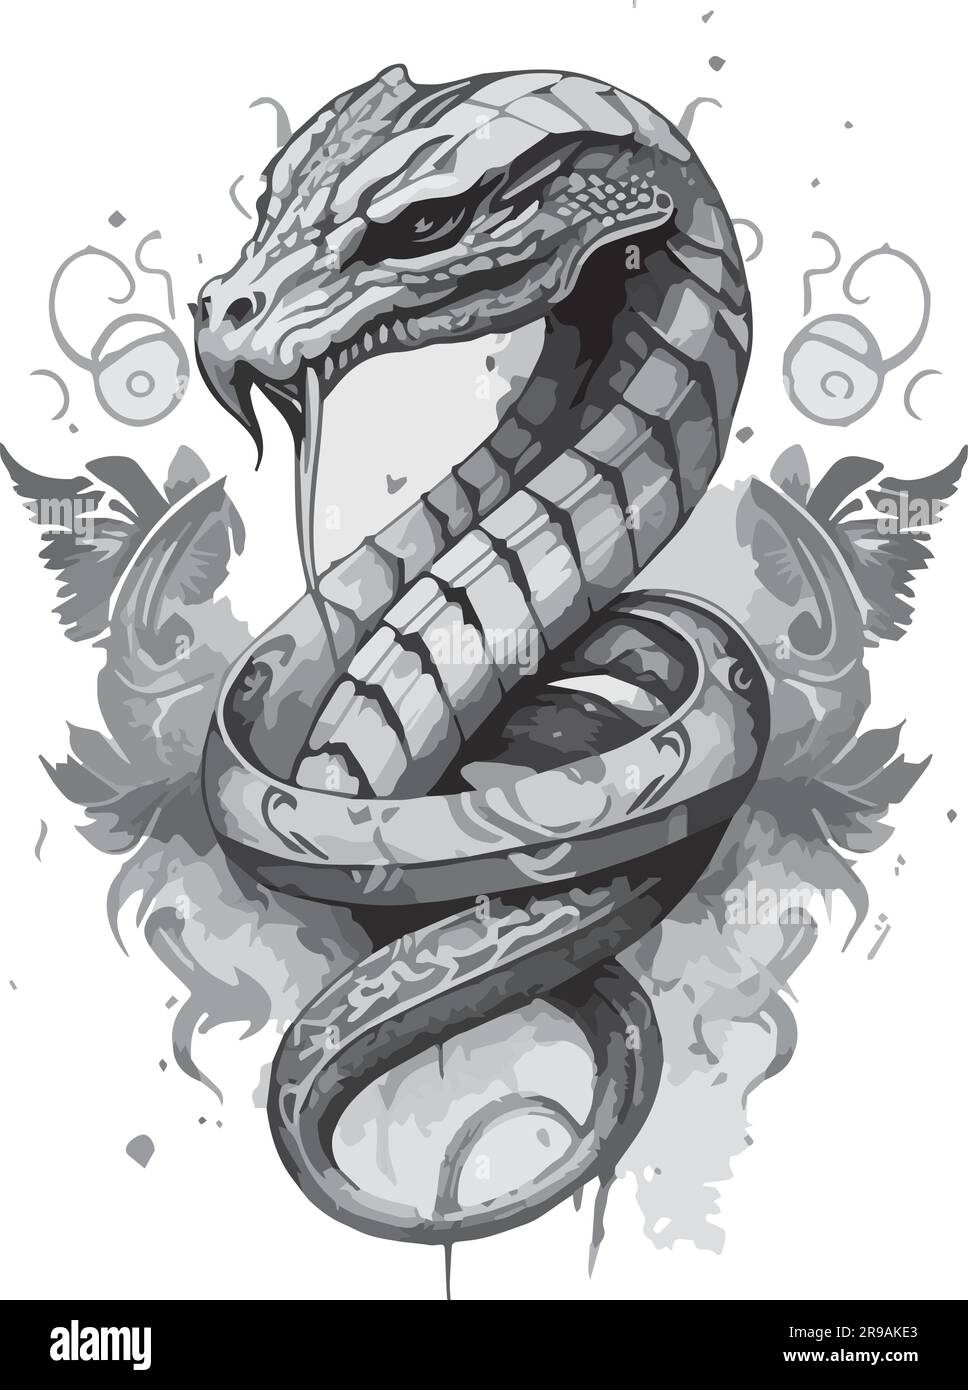 101 Amazing Cobra Tattoo Designs You Need To See! | Cobra tattoo, Snake  tattoo design, King cobra tattoo